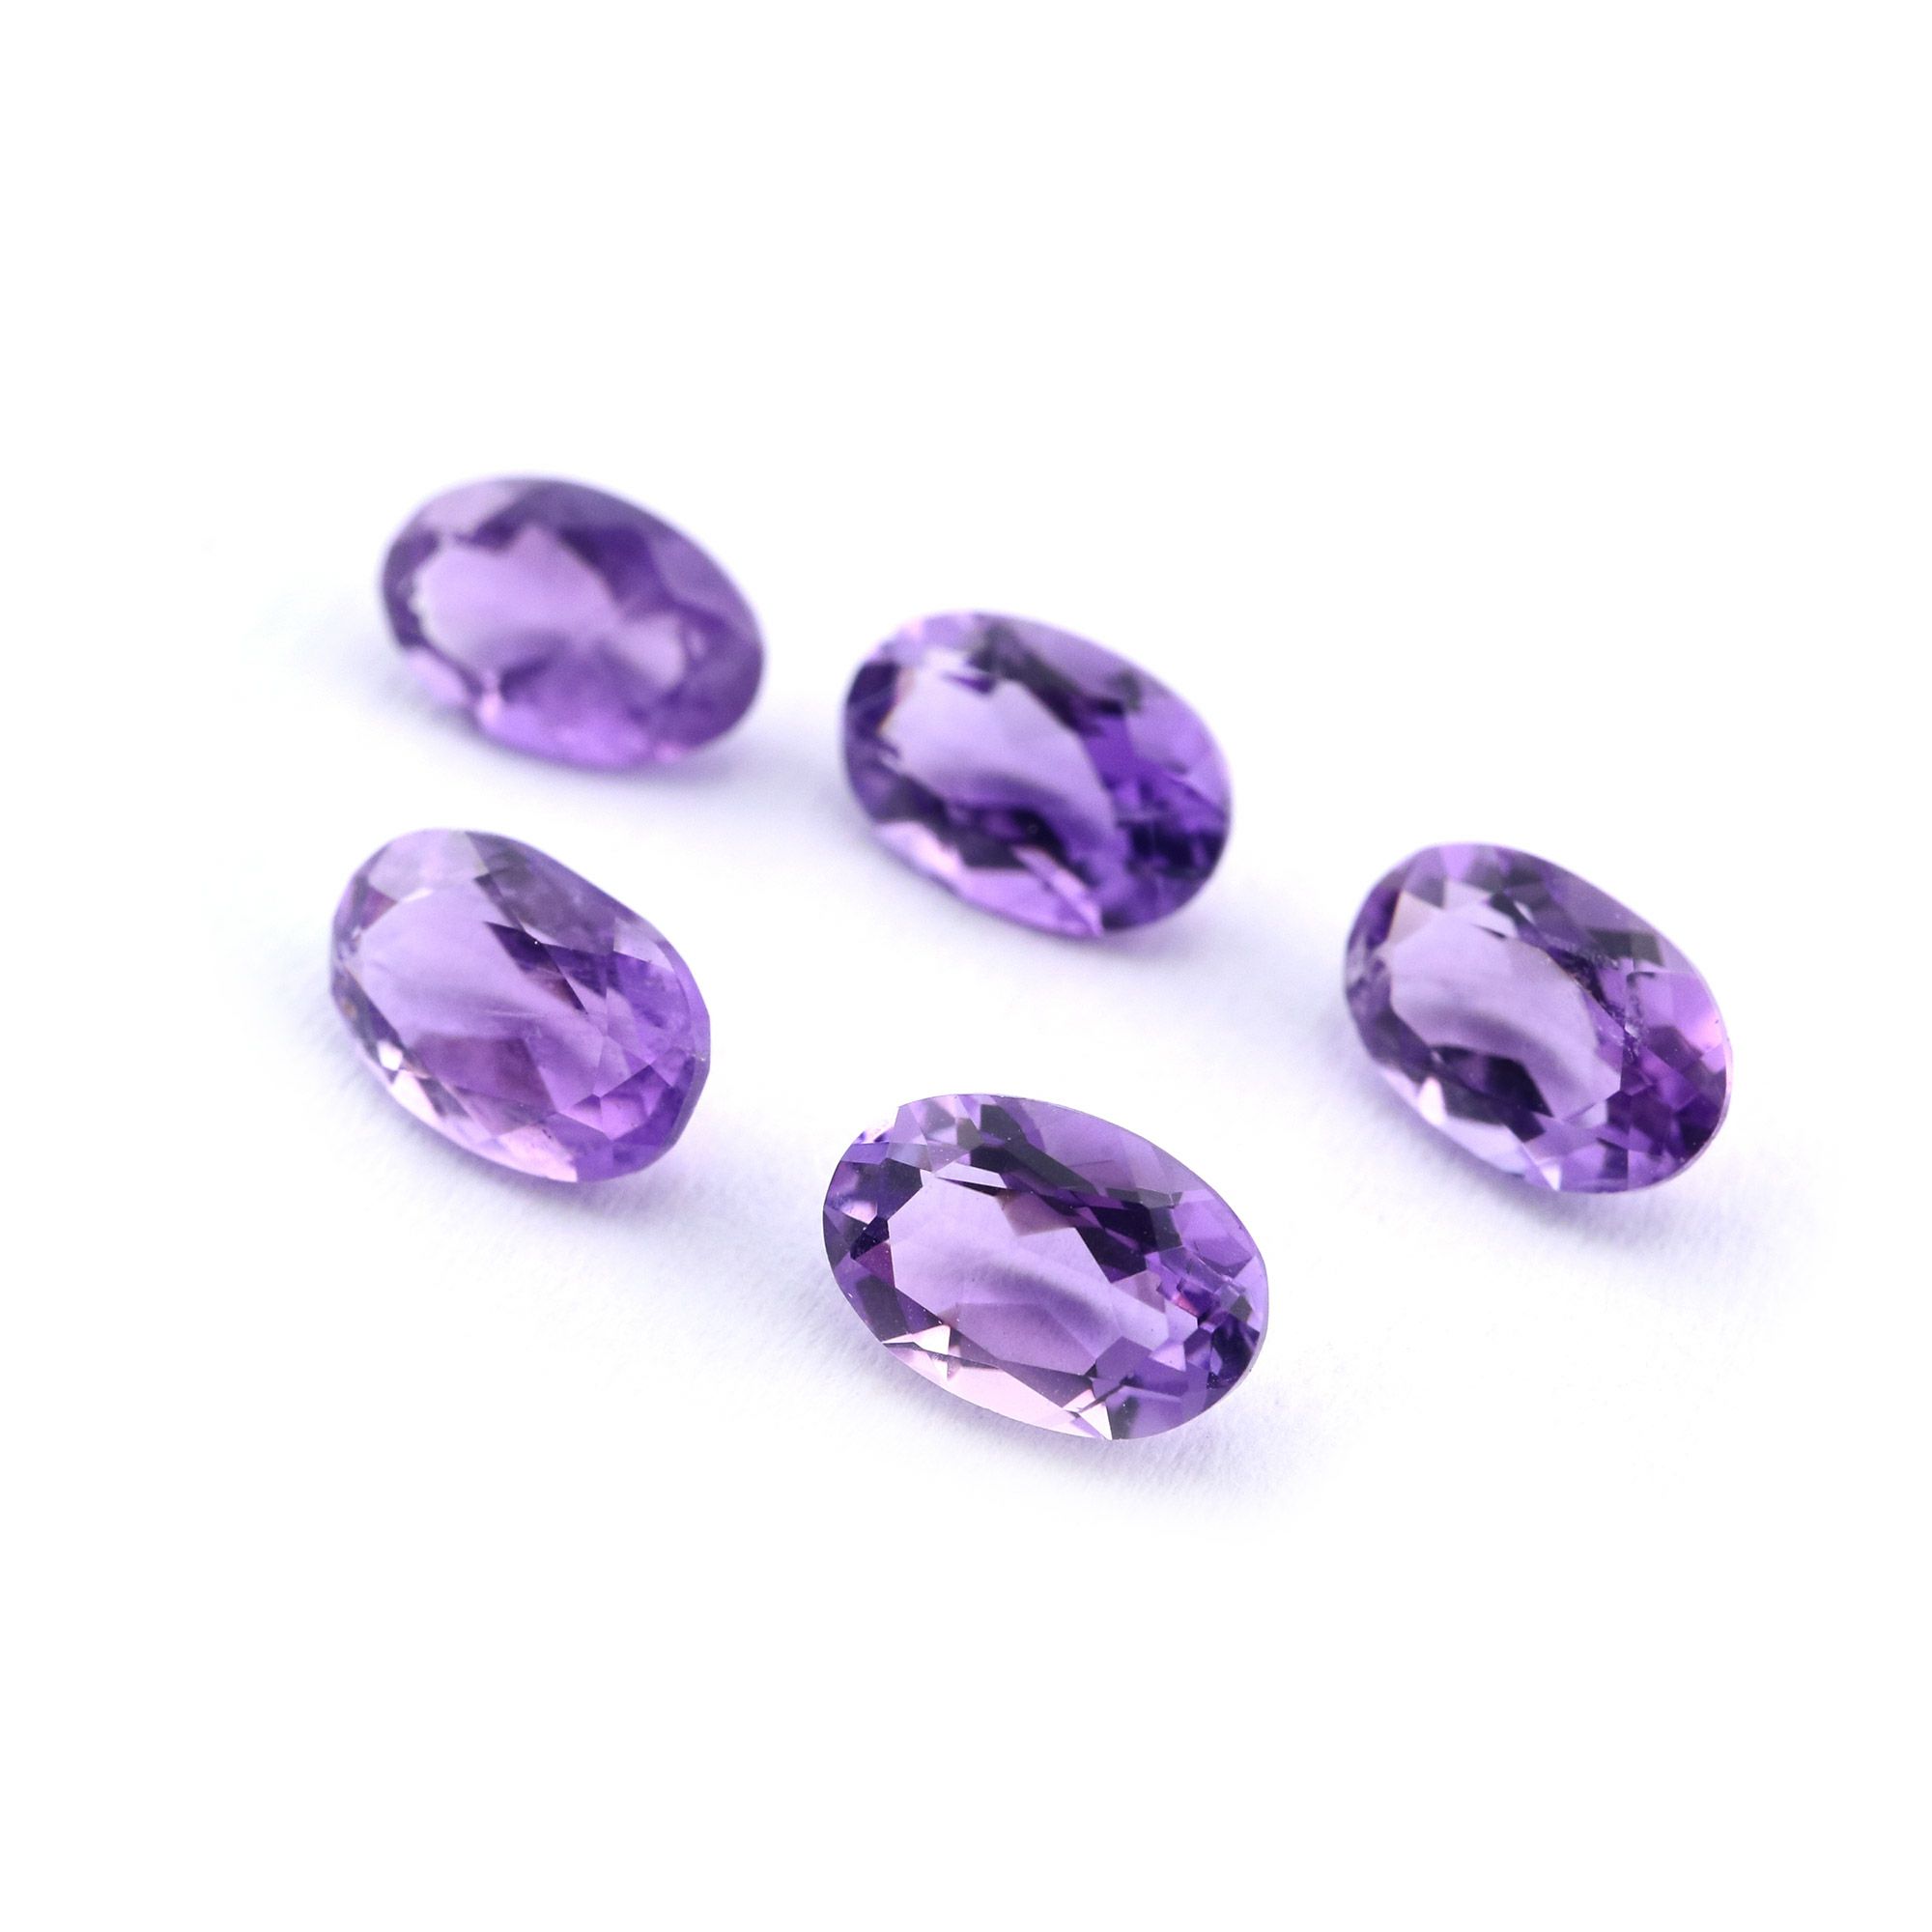 5Pcs Oval Purple Amethyst February Birthstone Faceted Cut Loose Gemstone Natural Semi Precious Stone DIY Jewelry Supplies 4120123 - Click Image to Close